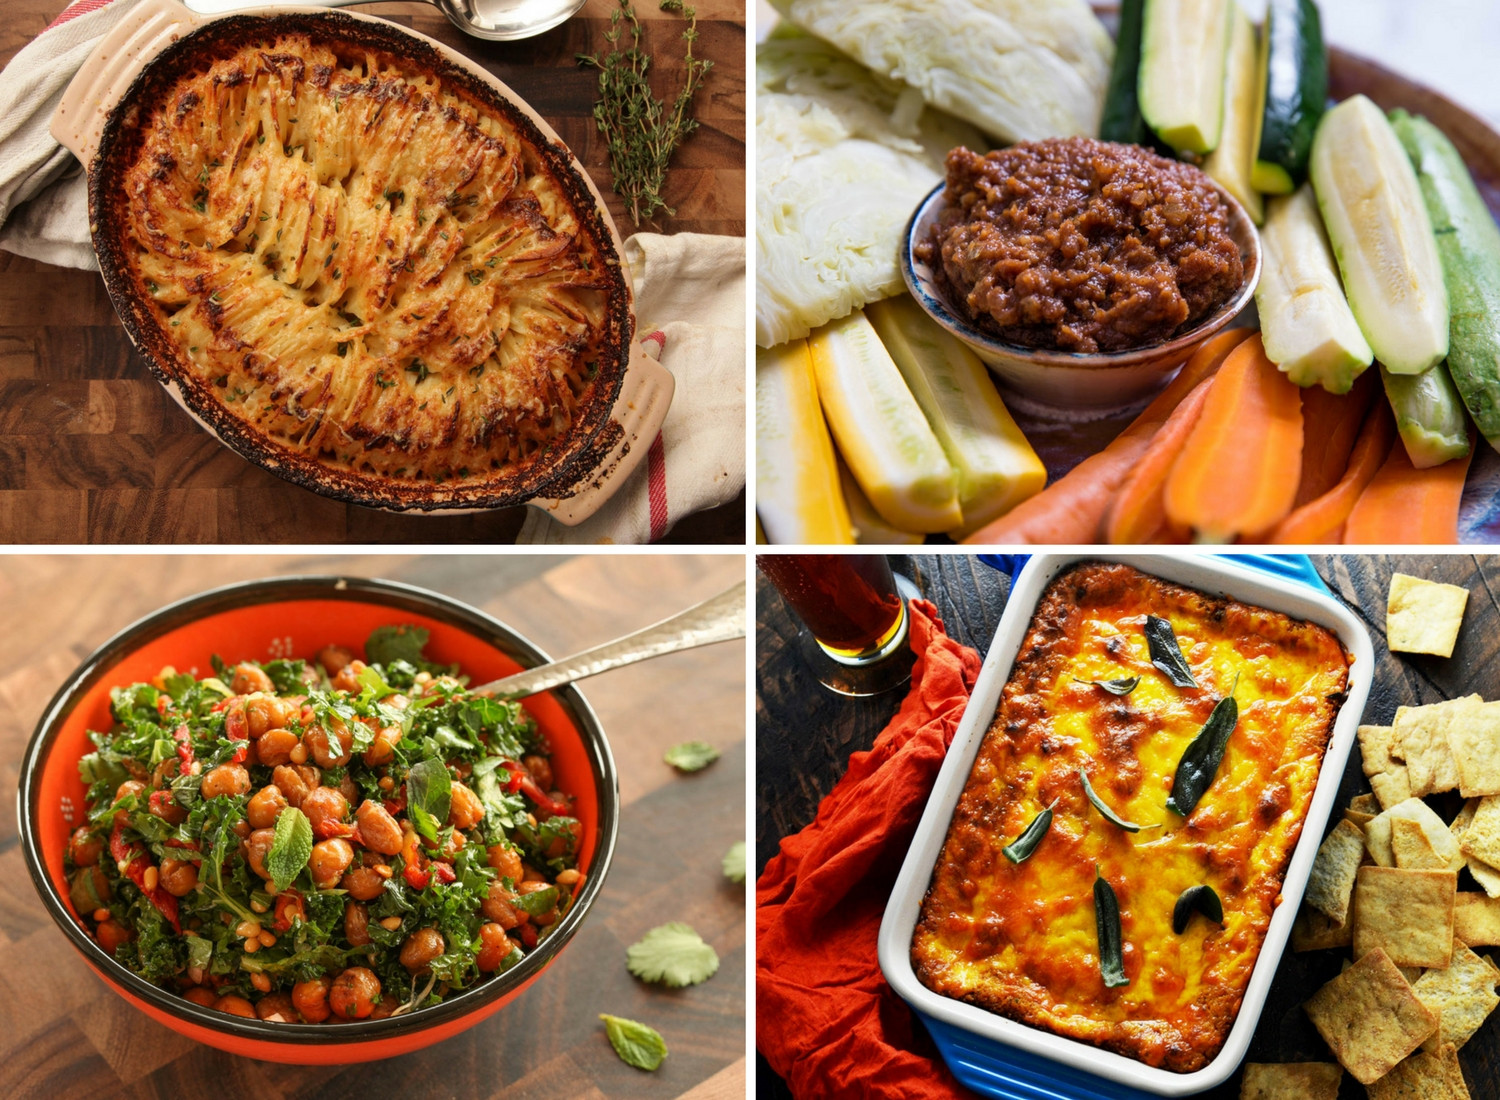 Make Ahead Thanksgiving Dishes
 15 Make Ahead Thanksgiving Dishes That Travel Well